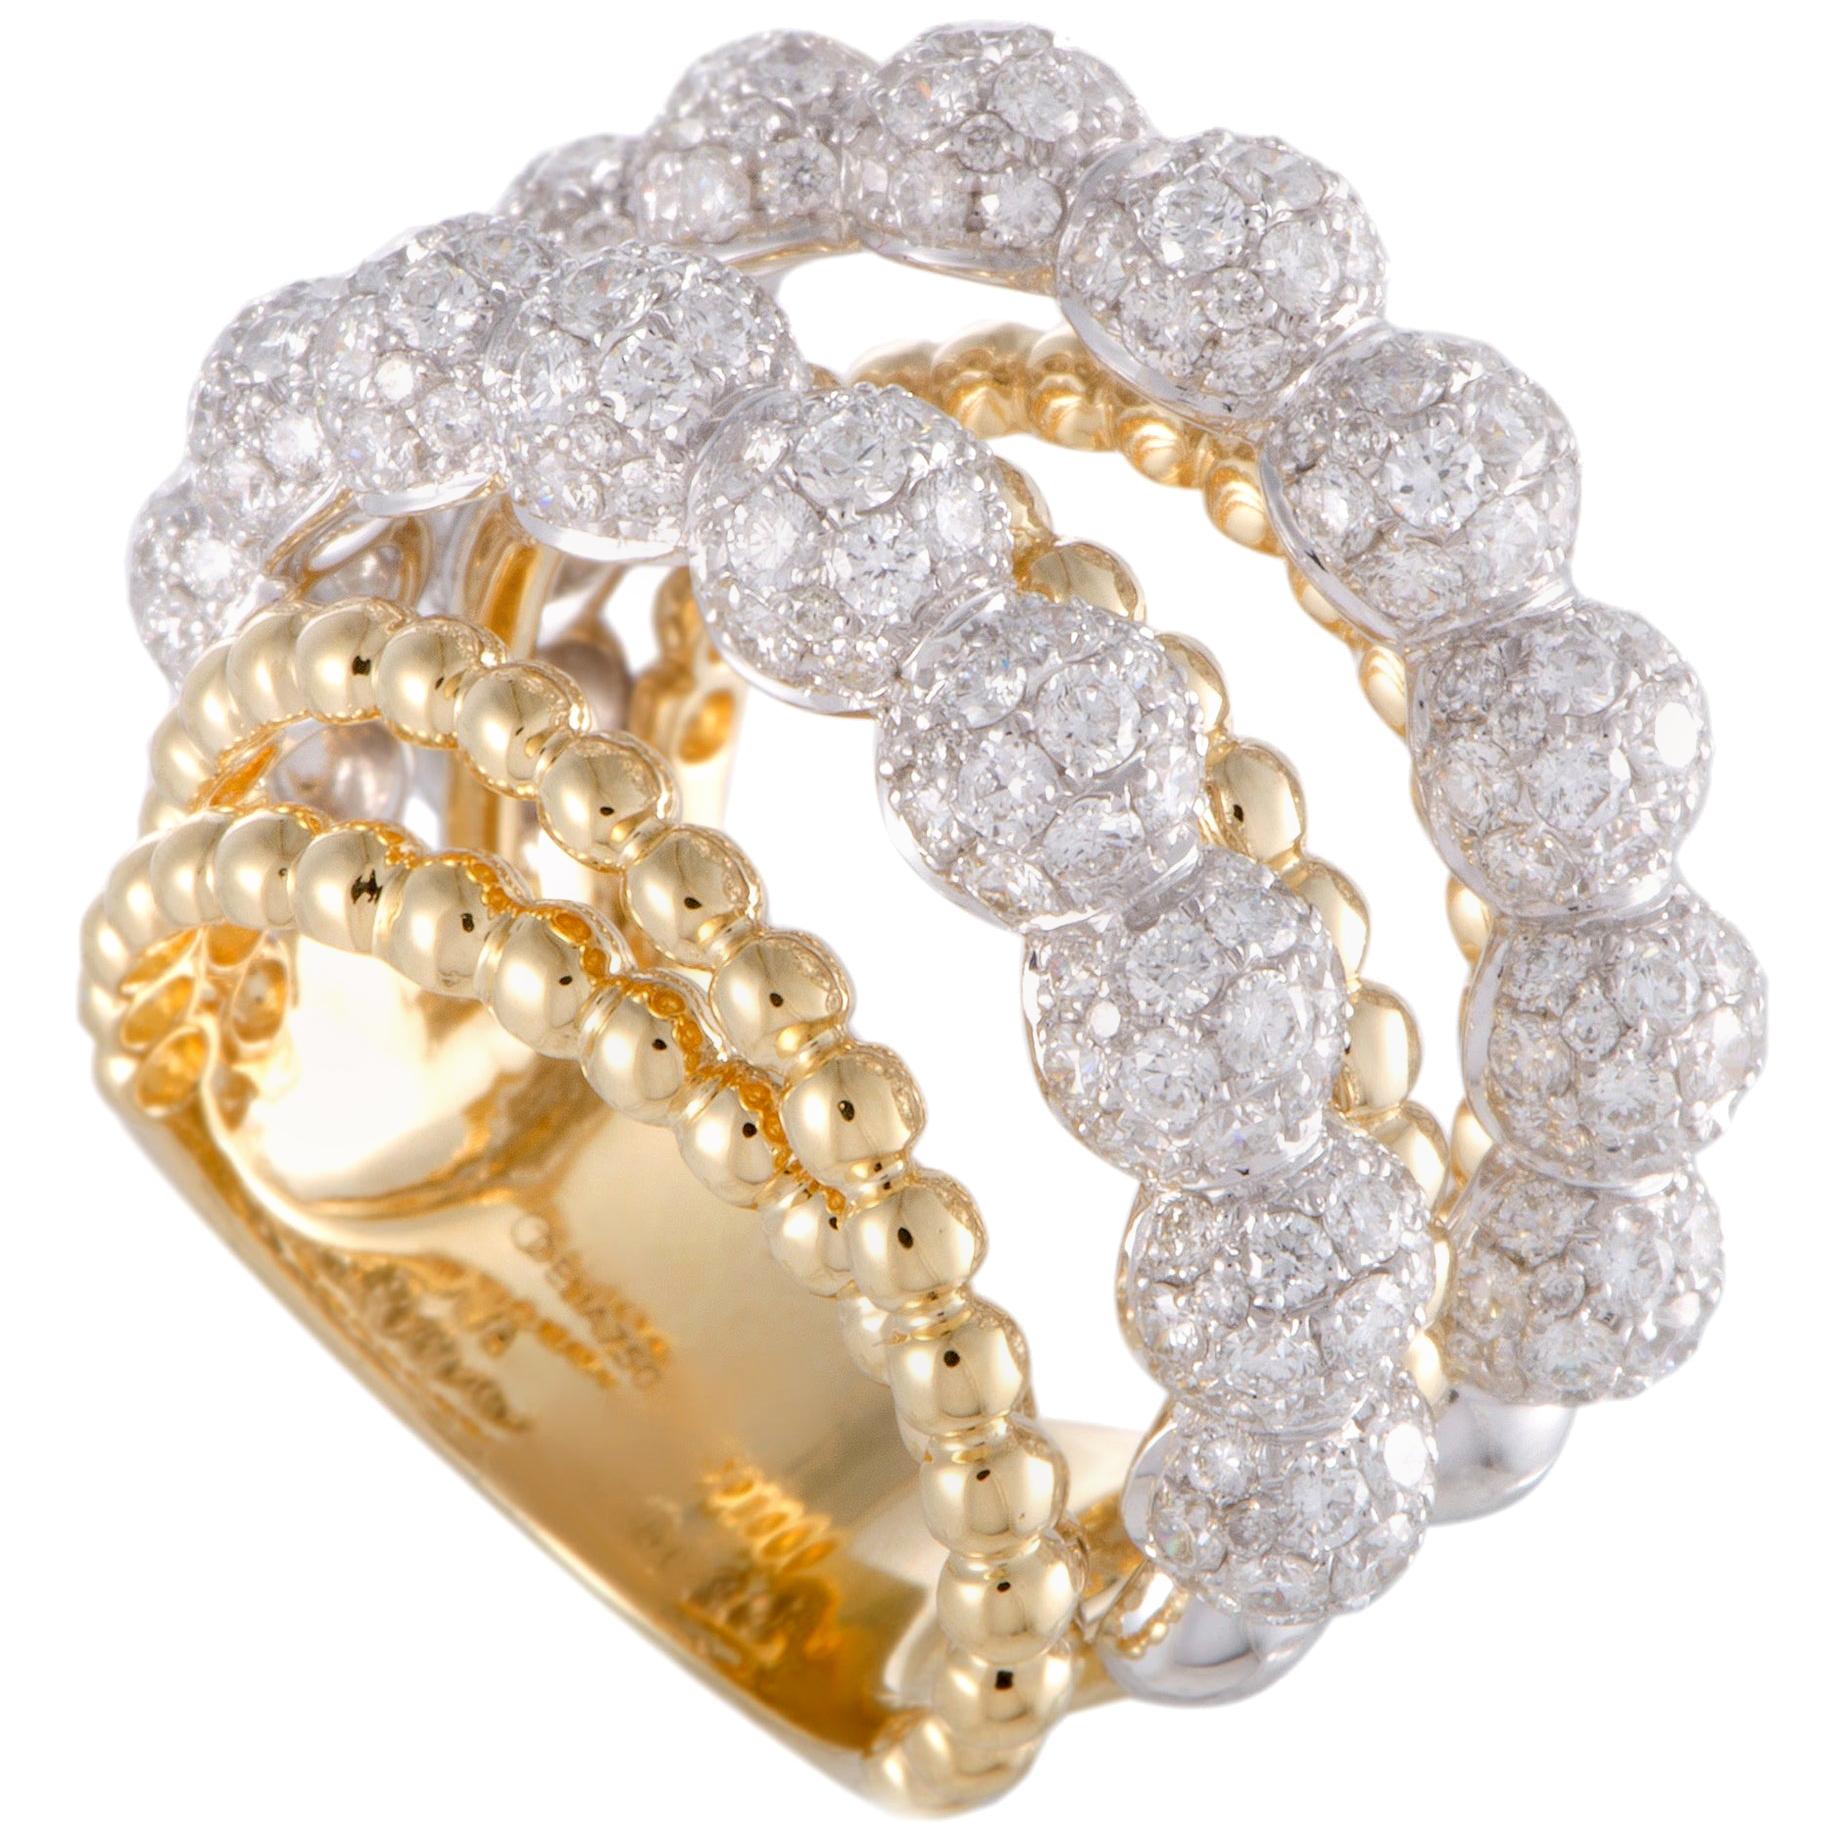 LB Exclusive 18k Yellow and White Gold, 3.90 Carat Diamond Beaded 6-Band Ring